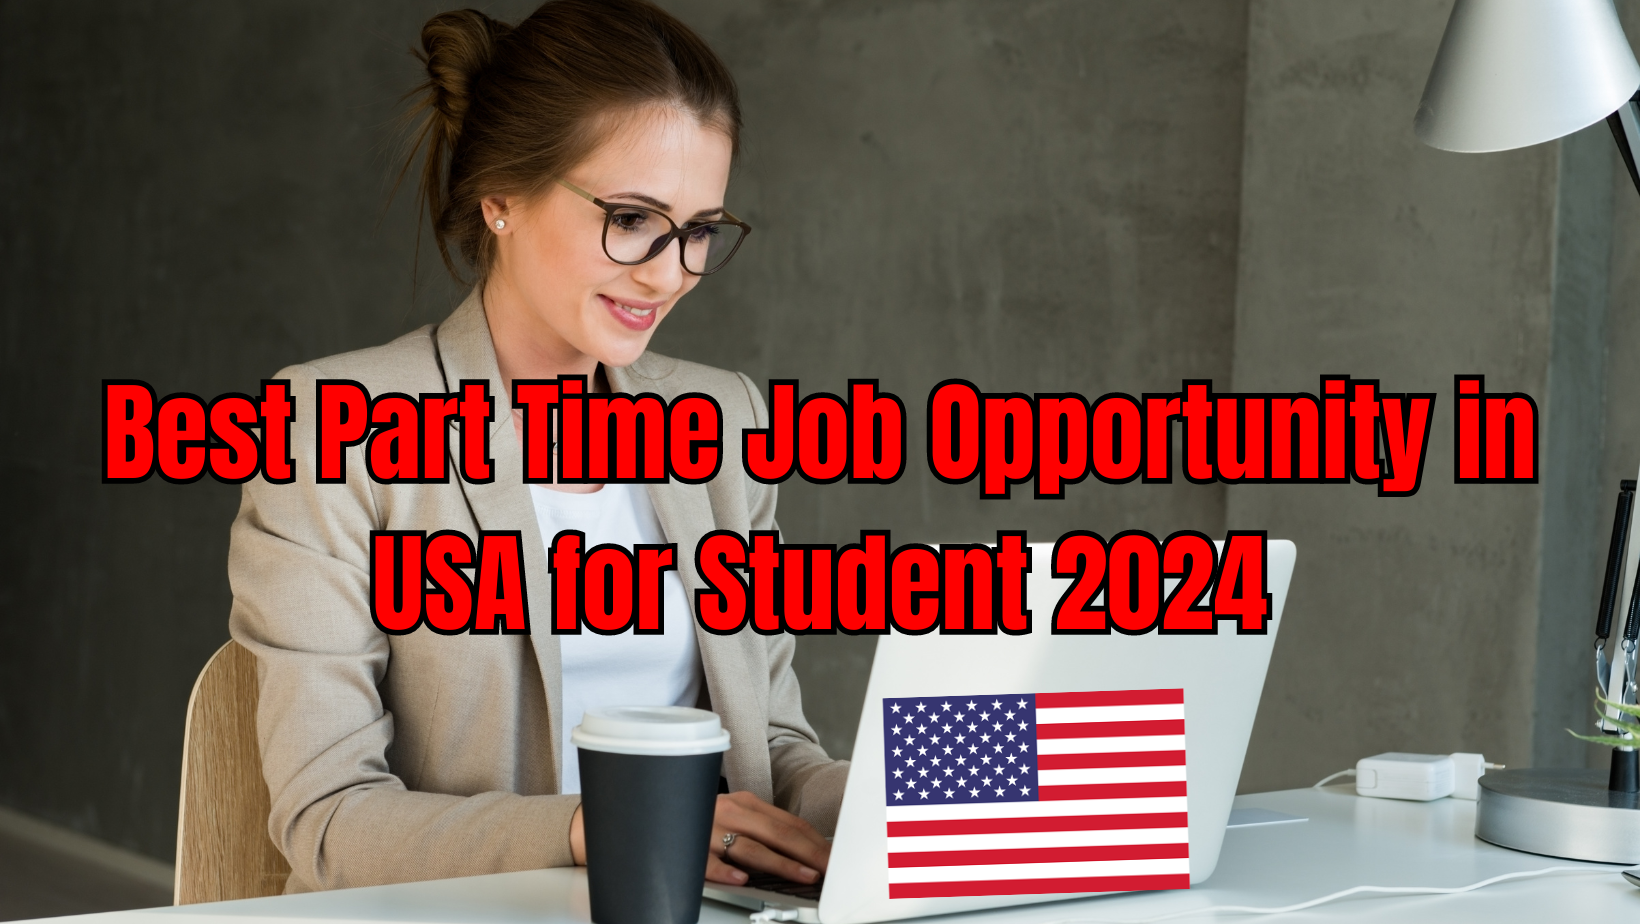 Best Part Time Job Opportunity in USA for Student 2024